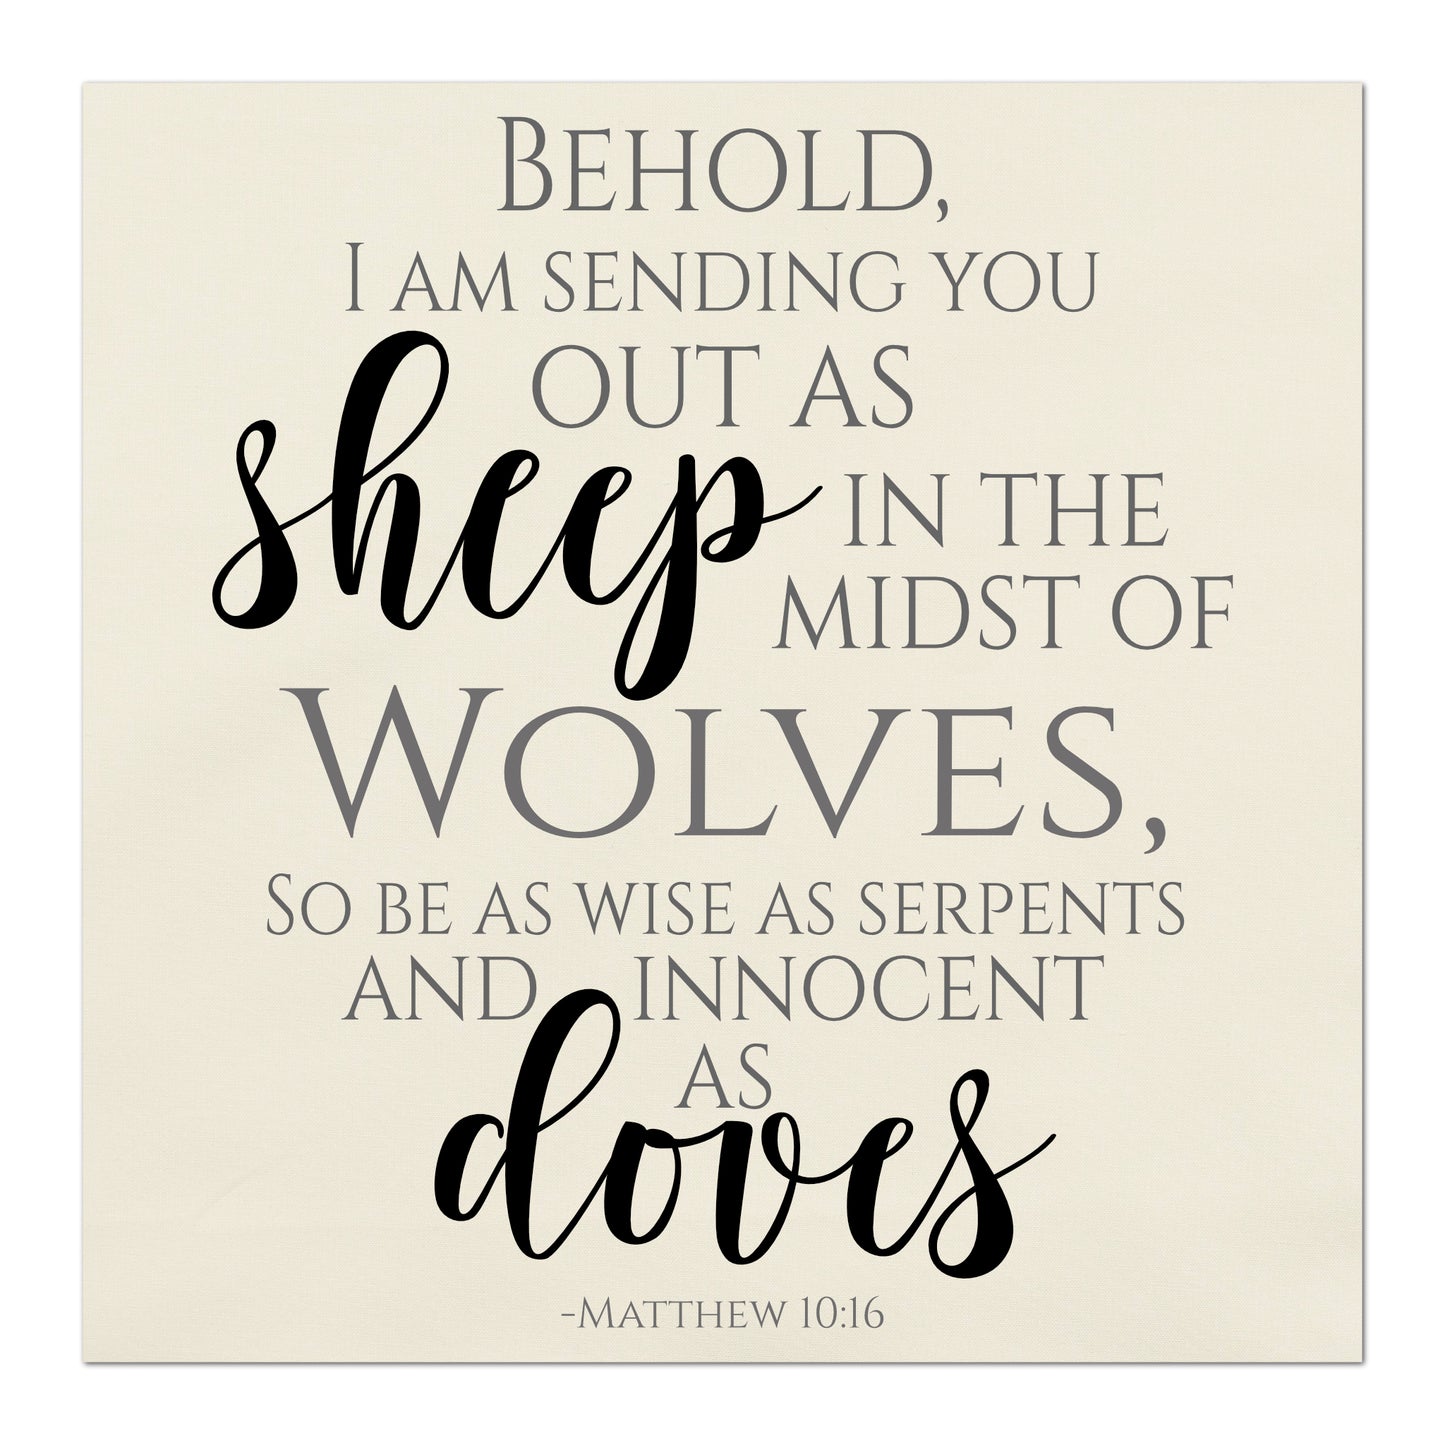 Behold, I am sending you out as sheep in the midst of wolves, so be as wise as serpents and innocent as doves.  - Matthew 10 16, Bible Verse Wall Art, Scripture Fabric, Religious Fabric, Quilt Block